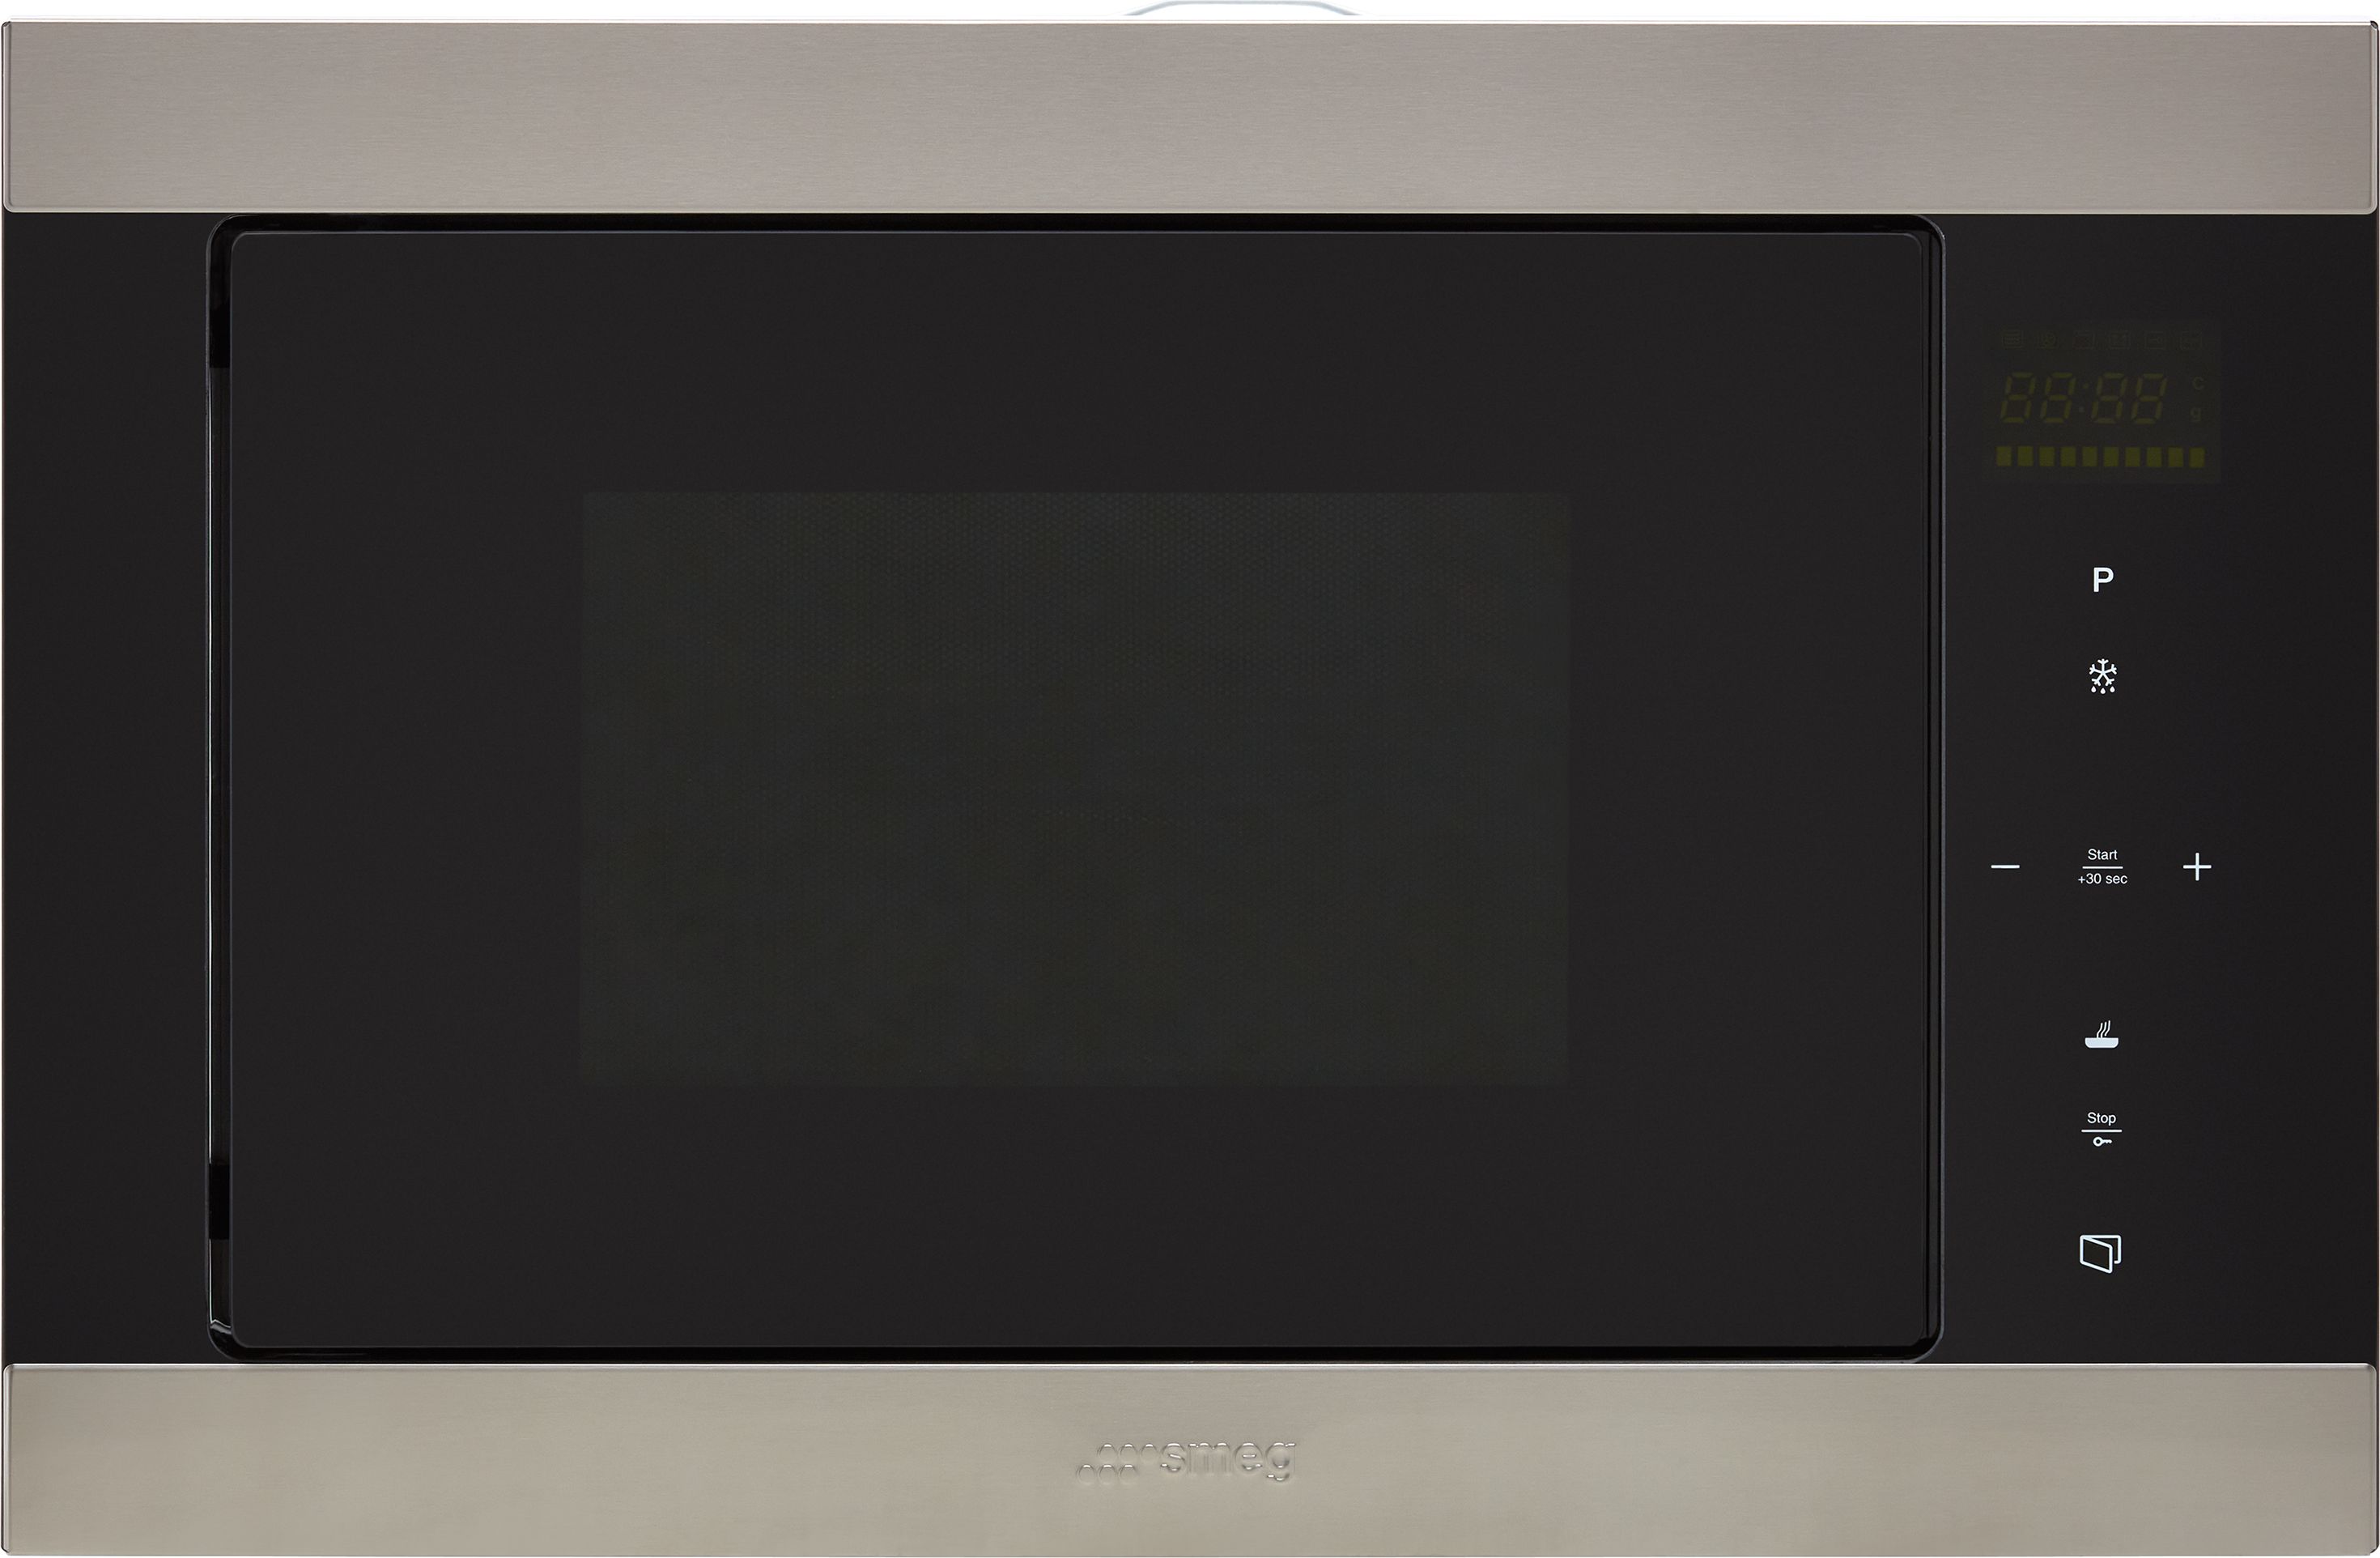 Smeg Classic FMI325X Built In 39cm Tall Compact Microwave - Stainless Steel, Stainless Steel